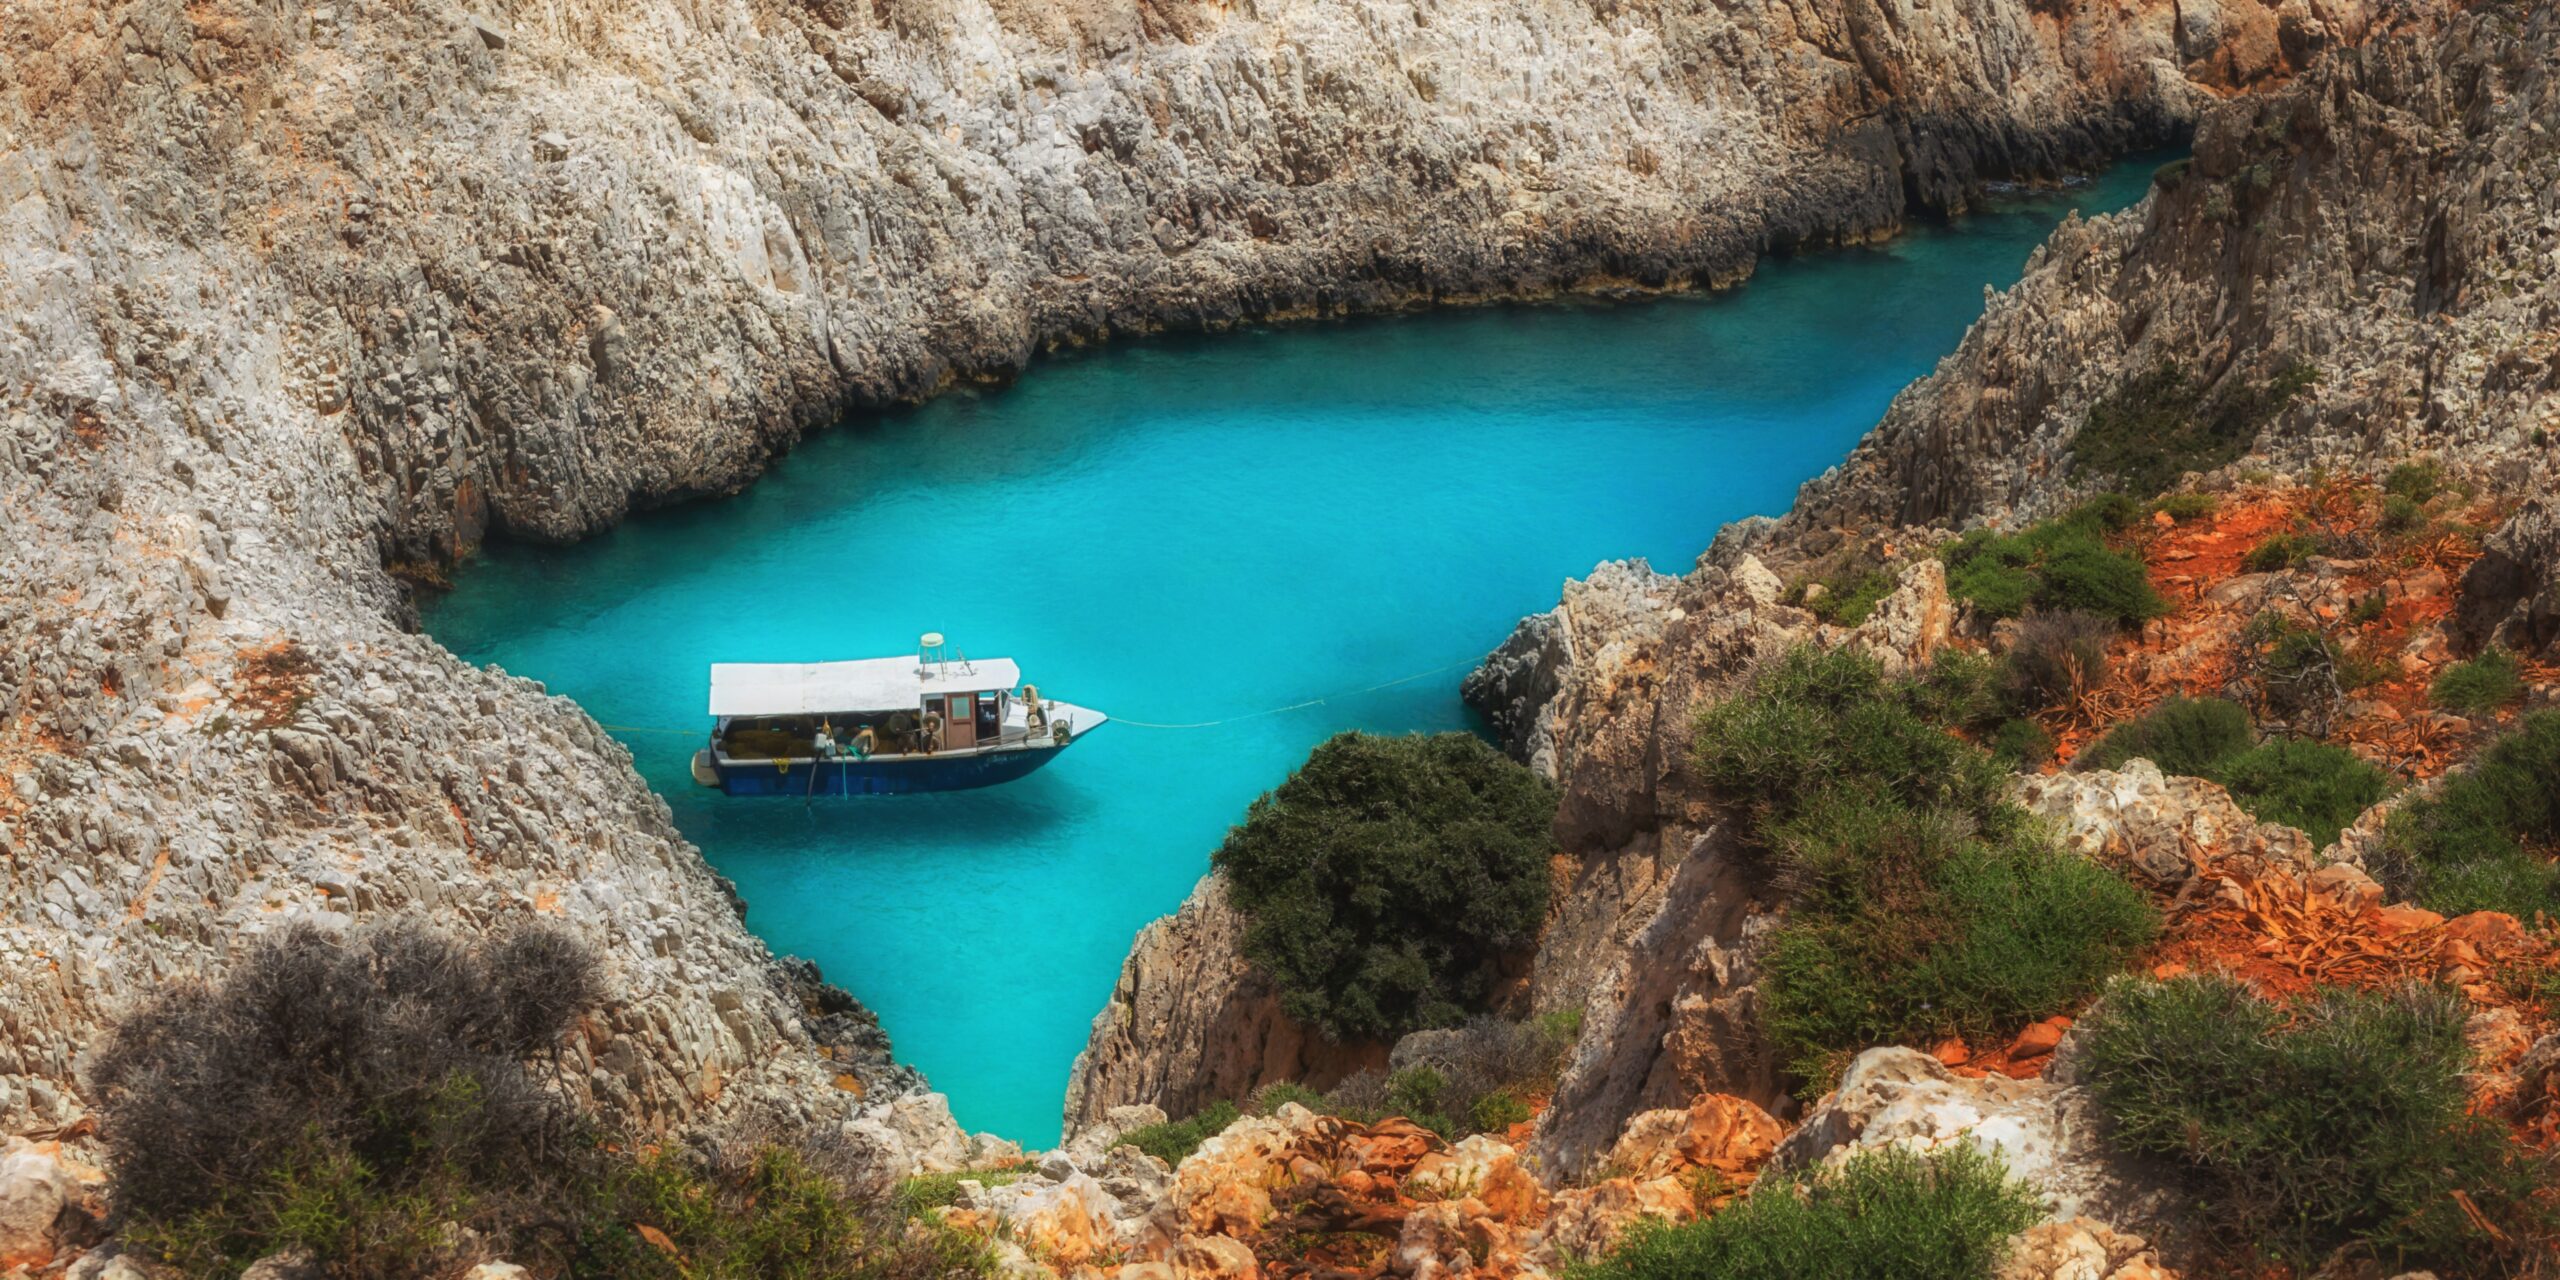 A boat anchored in a secluded blue cove surrounded by rugged cliffs.